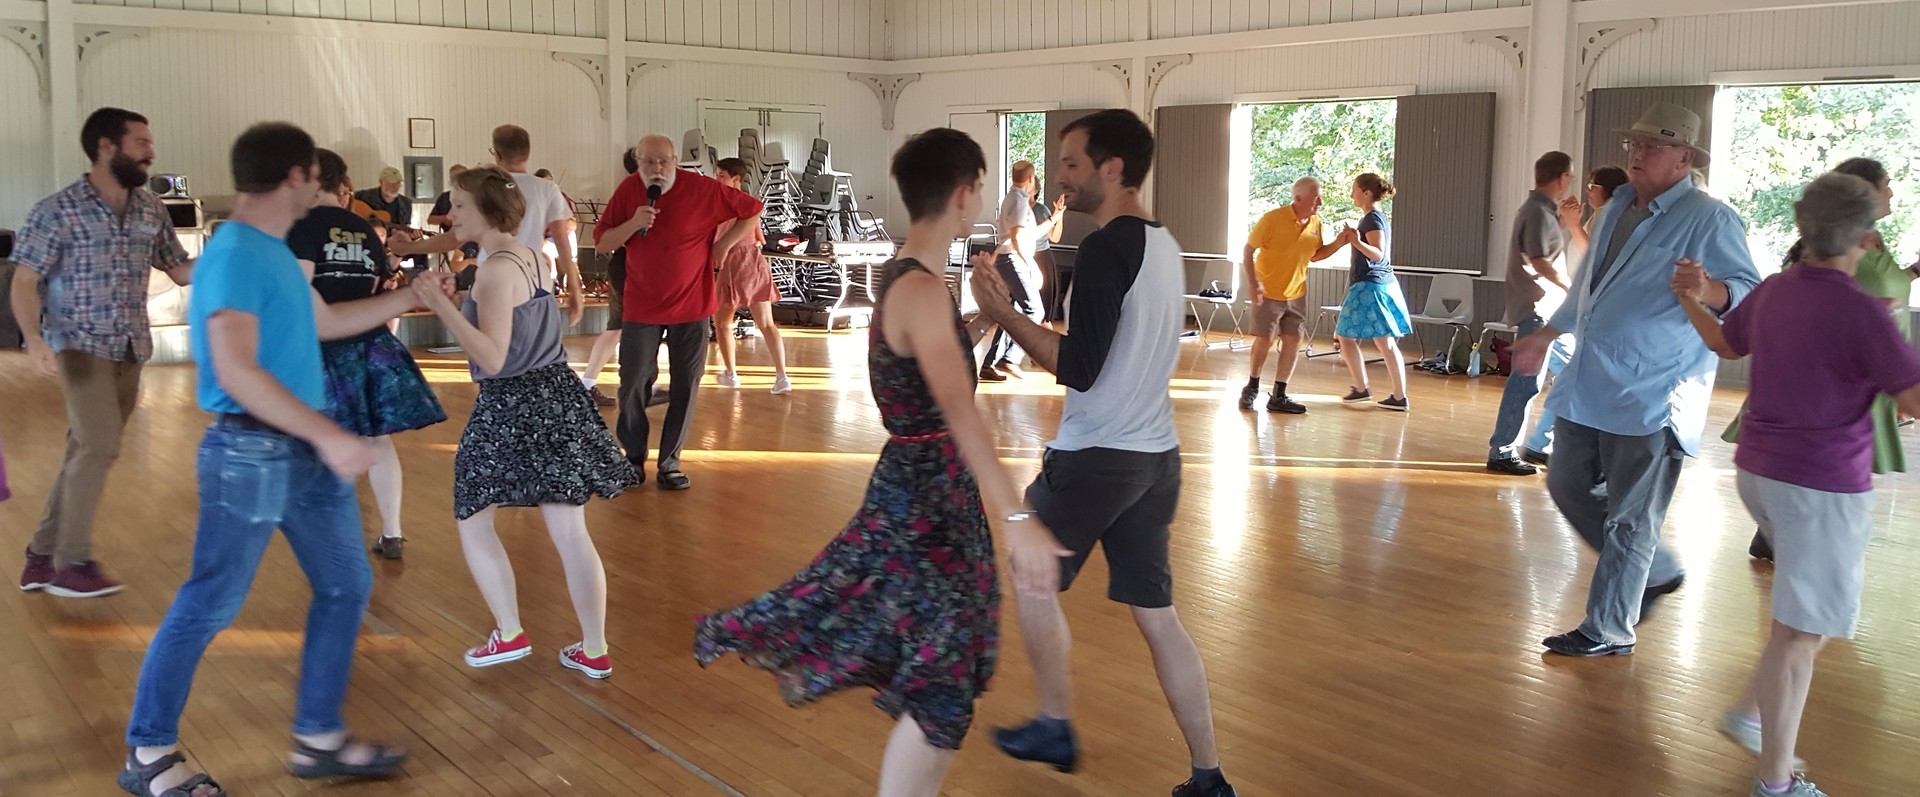 FOOT-Loose Fall Dance Series begins:  Tango, September 6th in Olin Park Pavilion, Madison, Wisconsin, United States